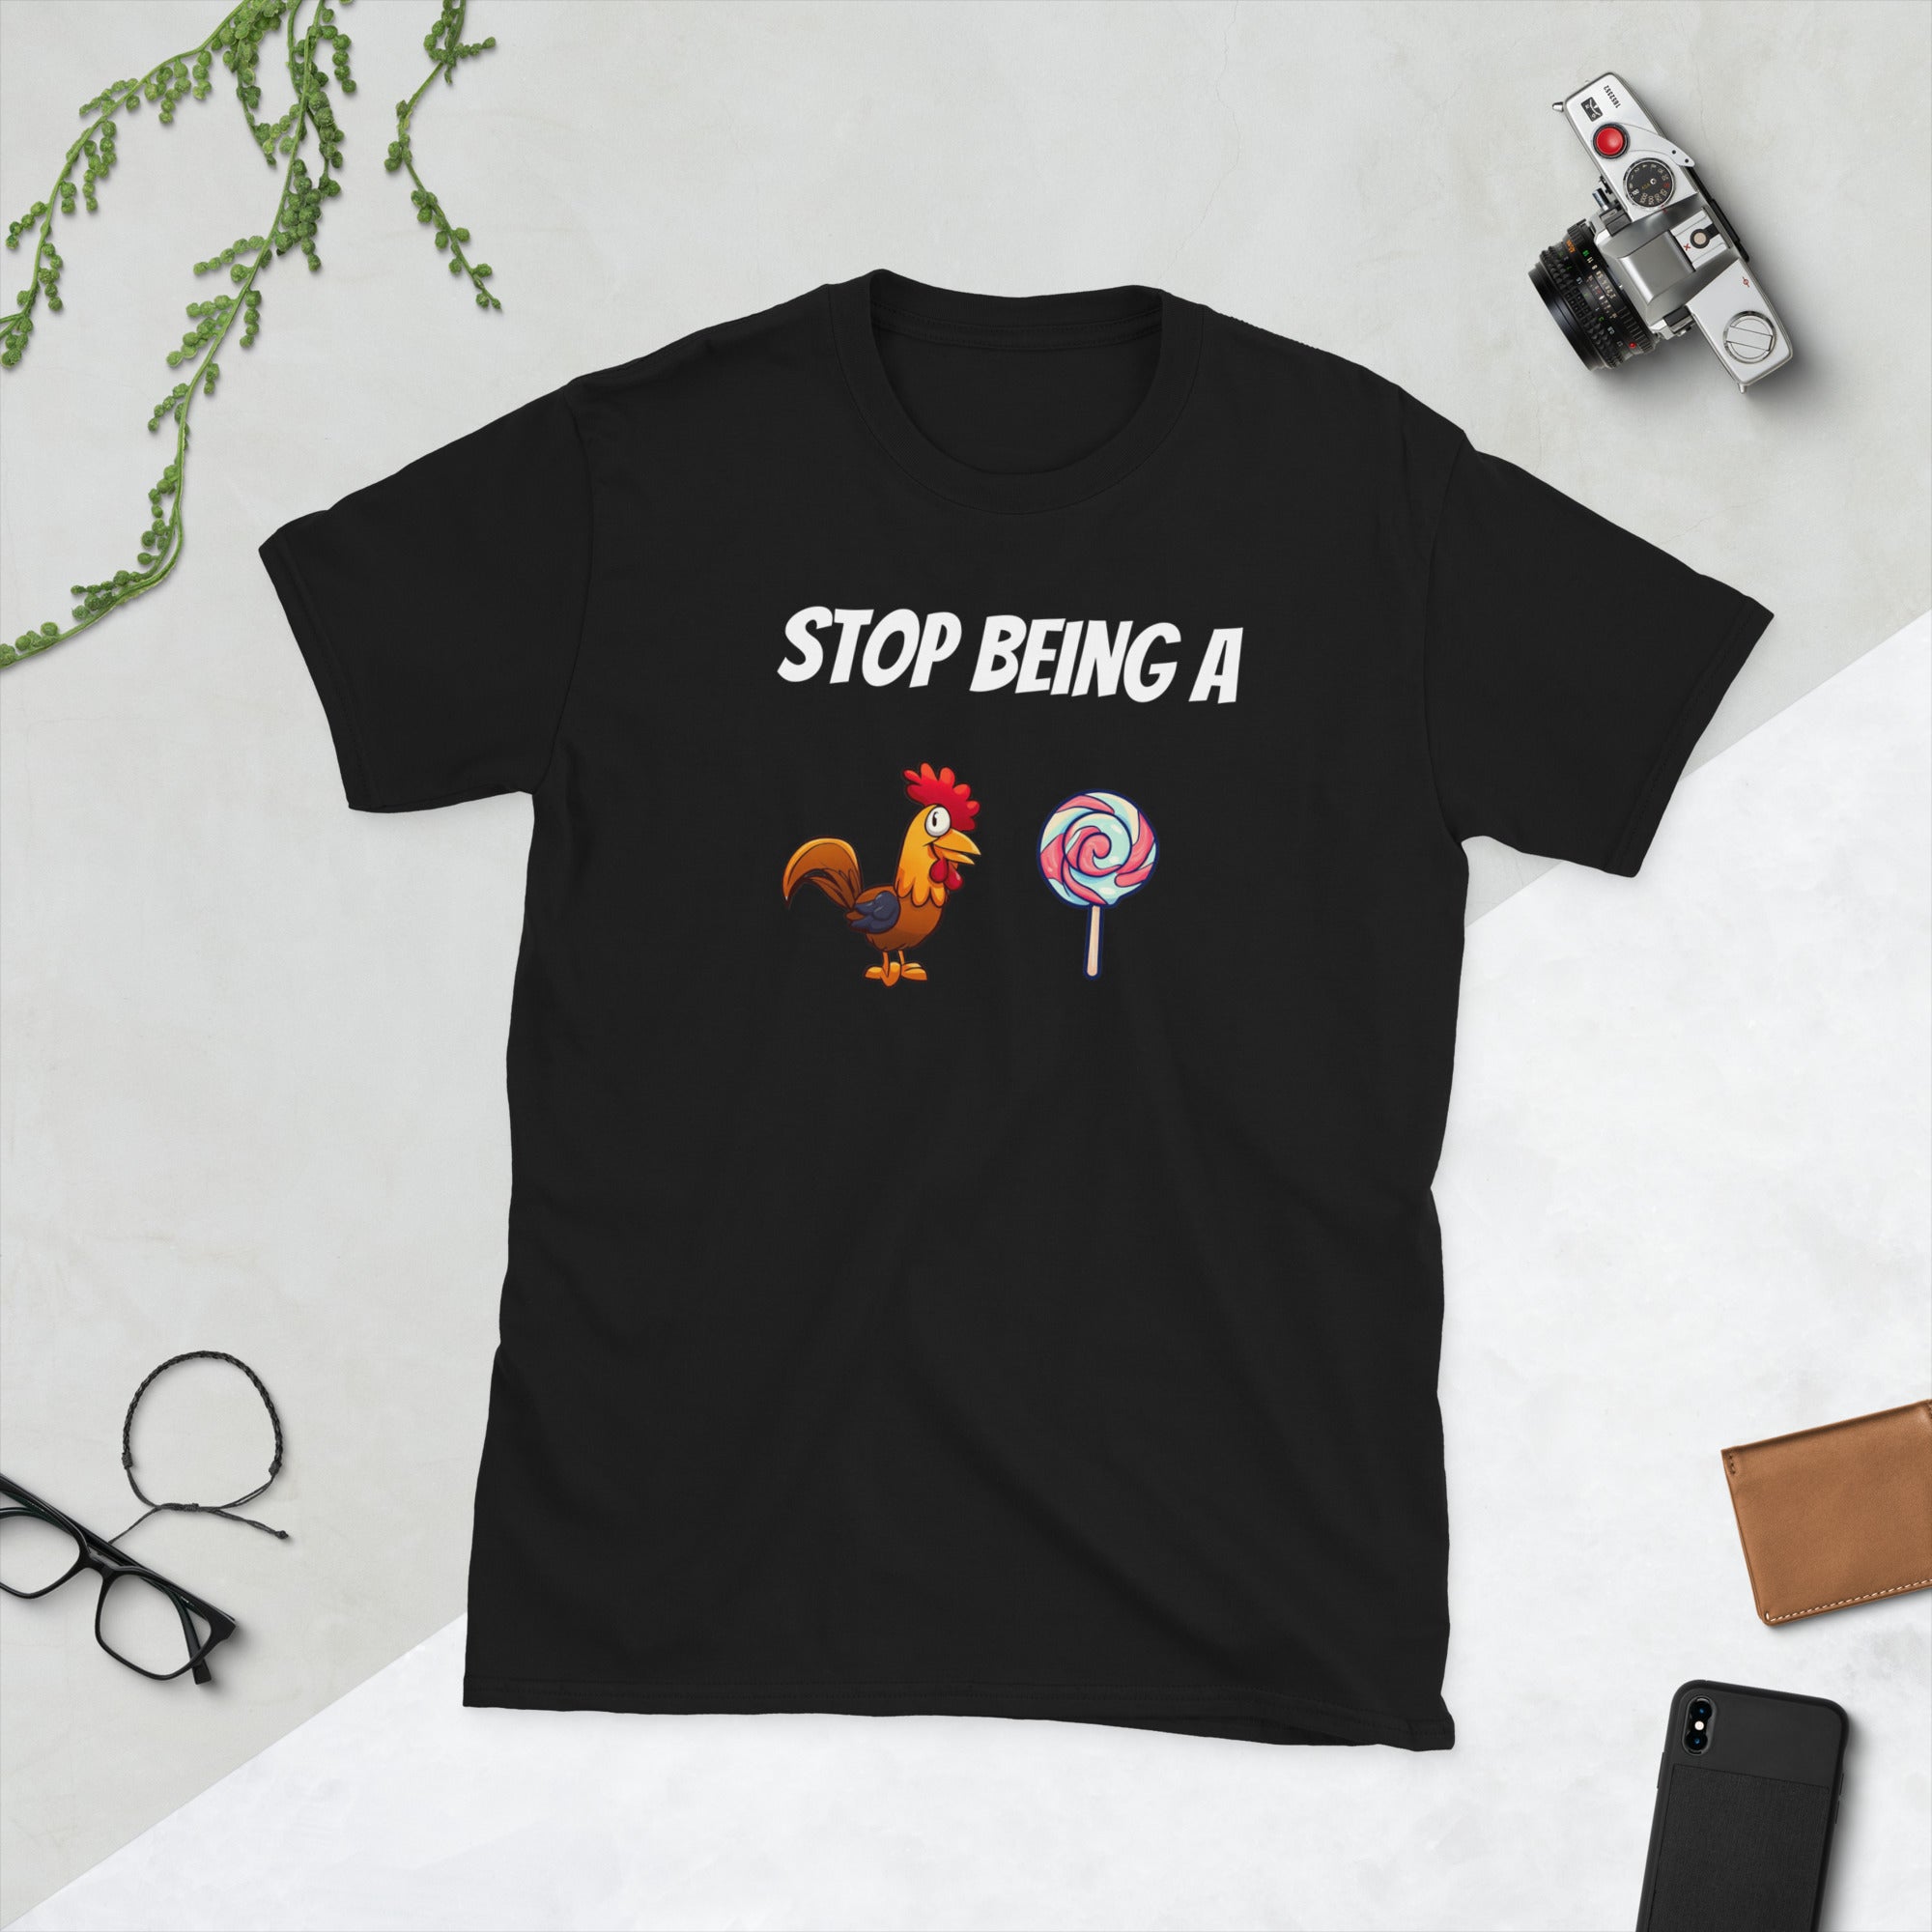 STOP BEING A.. T-Shirt